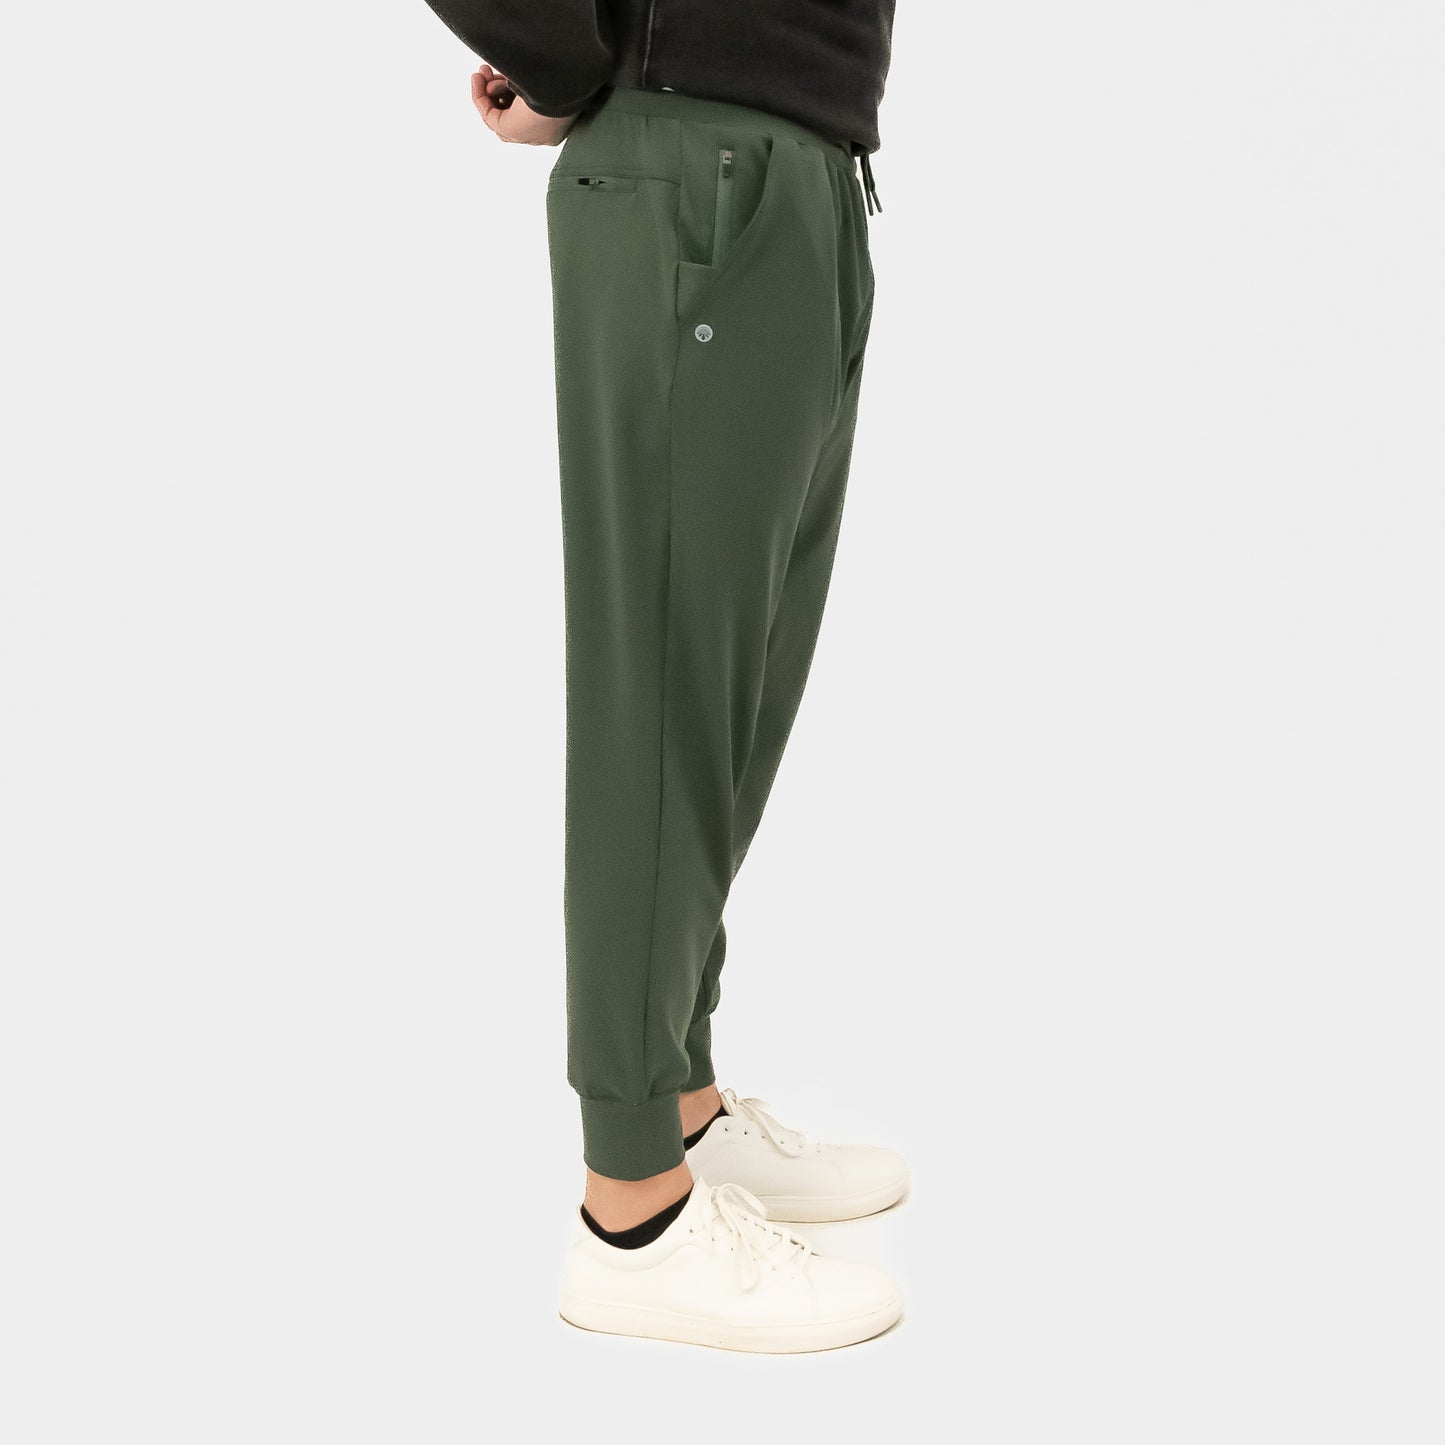 Lifestyle Joggers - Evergreen - FINAL SALE